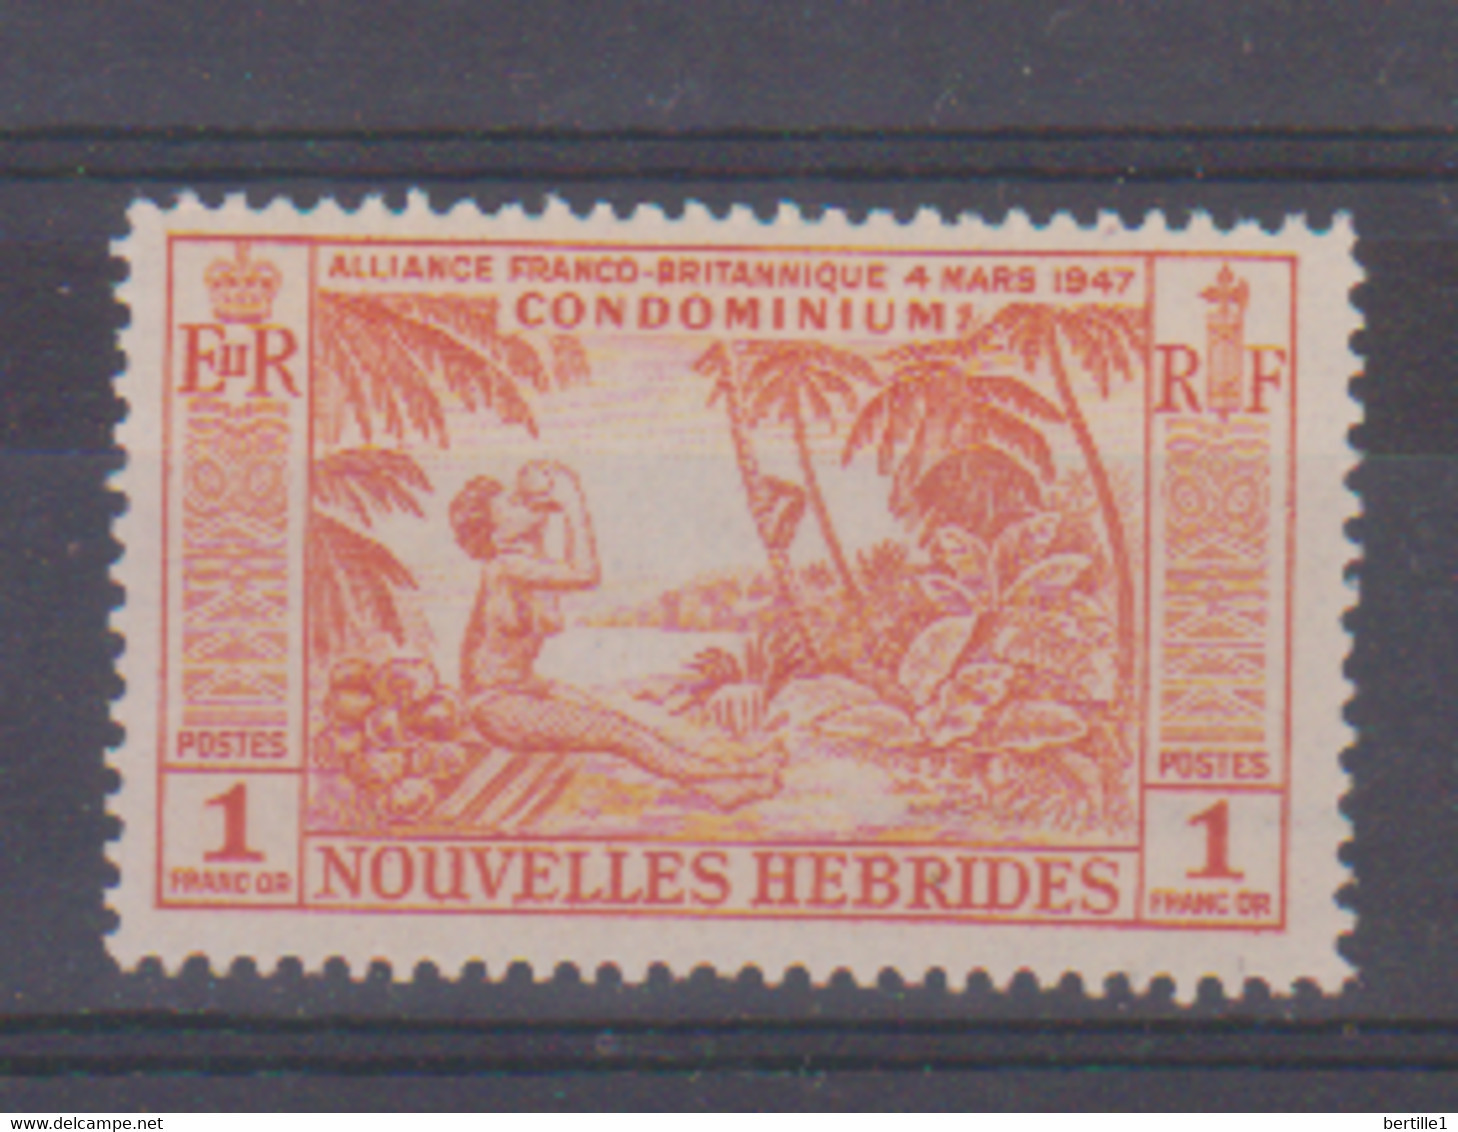 NOUVELLES HEBRIDES       N° YVERT  183   NEUF SANS CHARNIERES  (NSCH 02/ 26 ) - Unused Stamps